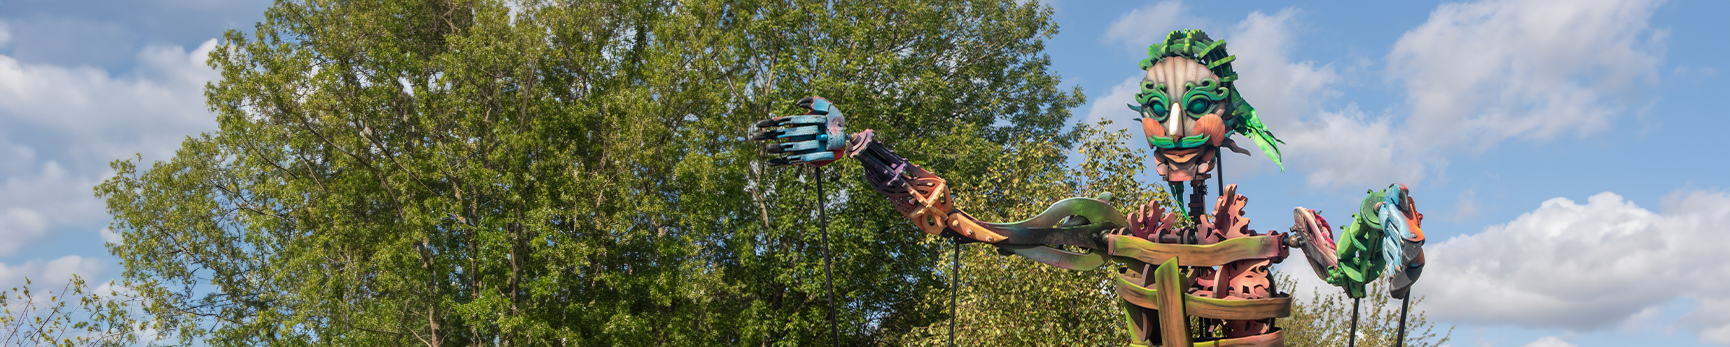 Photograph of 13-foot, multi-coloured sea giant puppet against a blue sky and trees